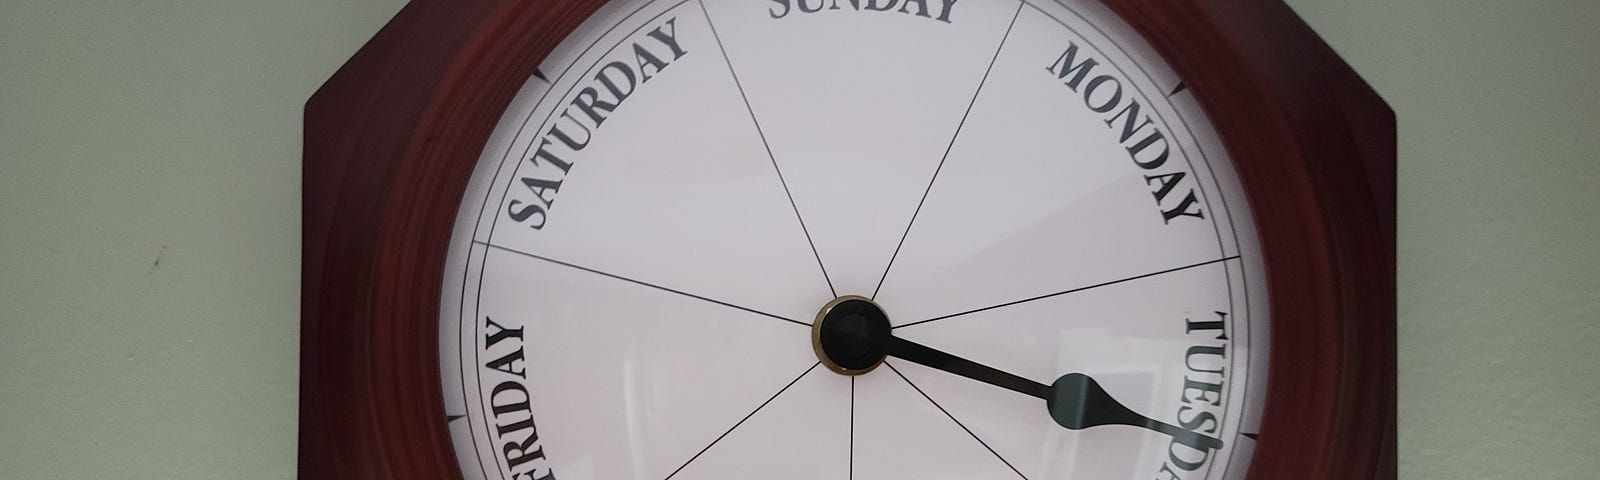 Clock with days of the week instead of hours